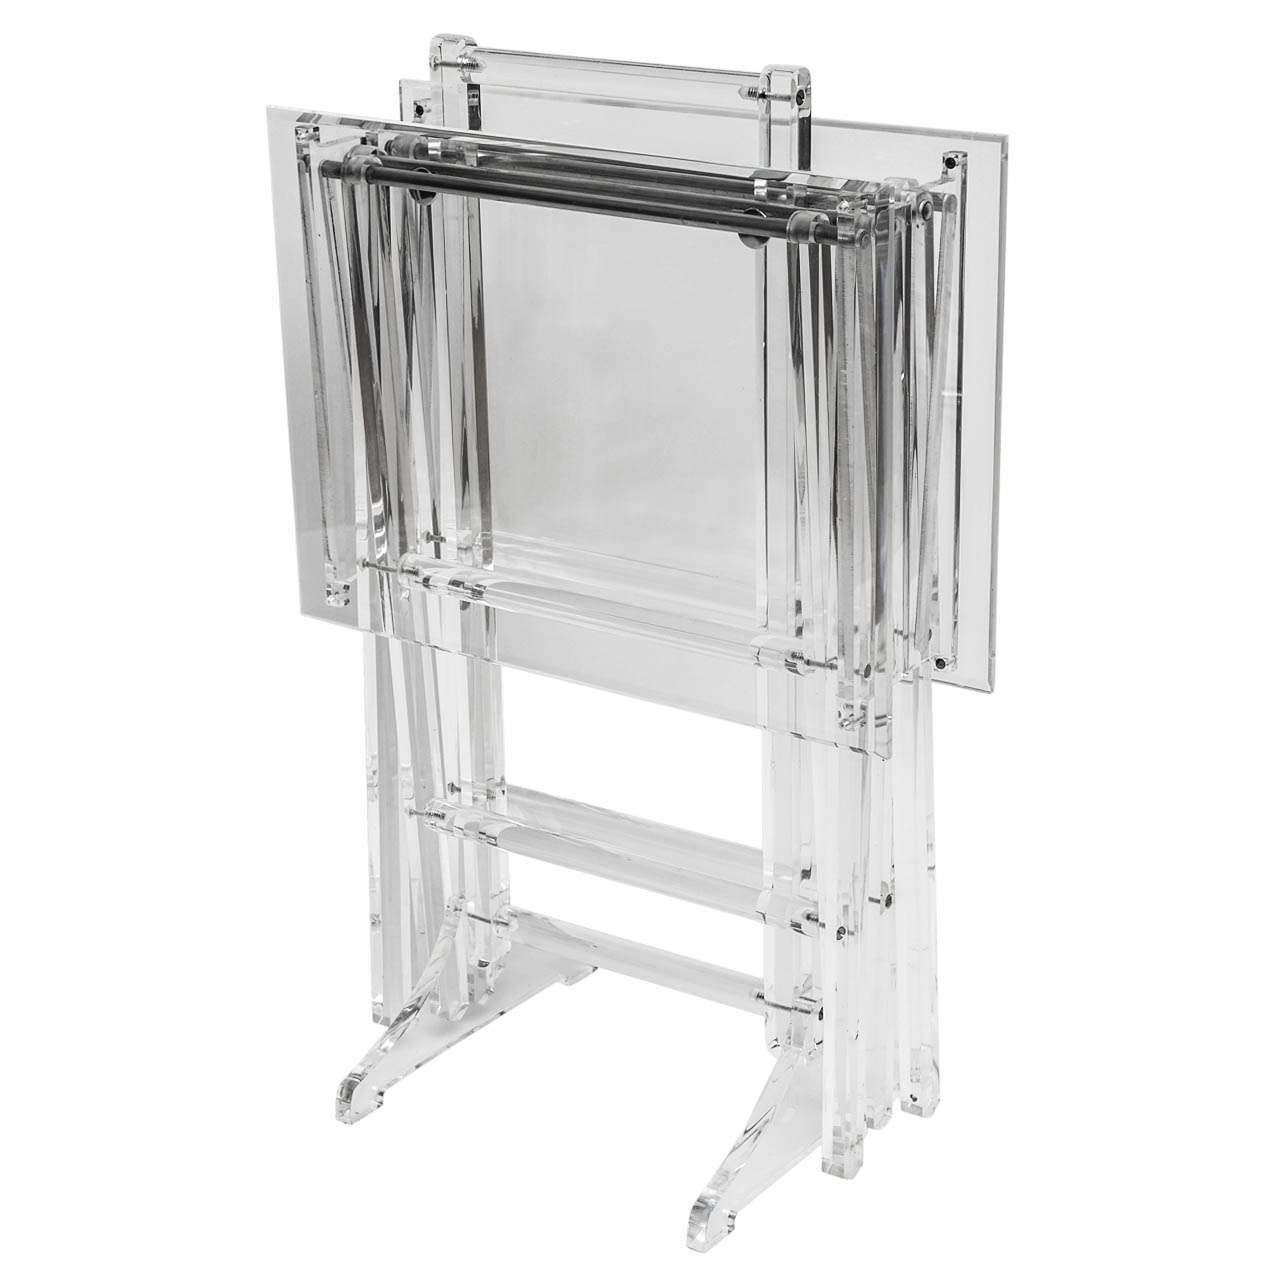 Pair of Lucite Folding Tables on Chrome and Lucite Caddy